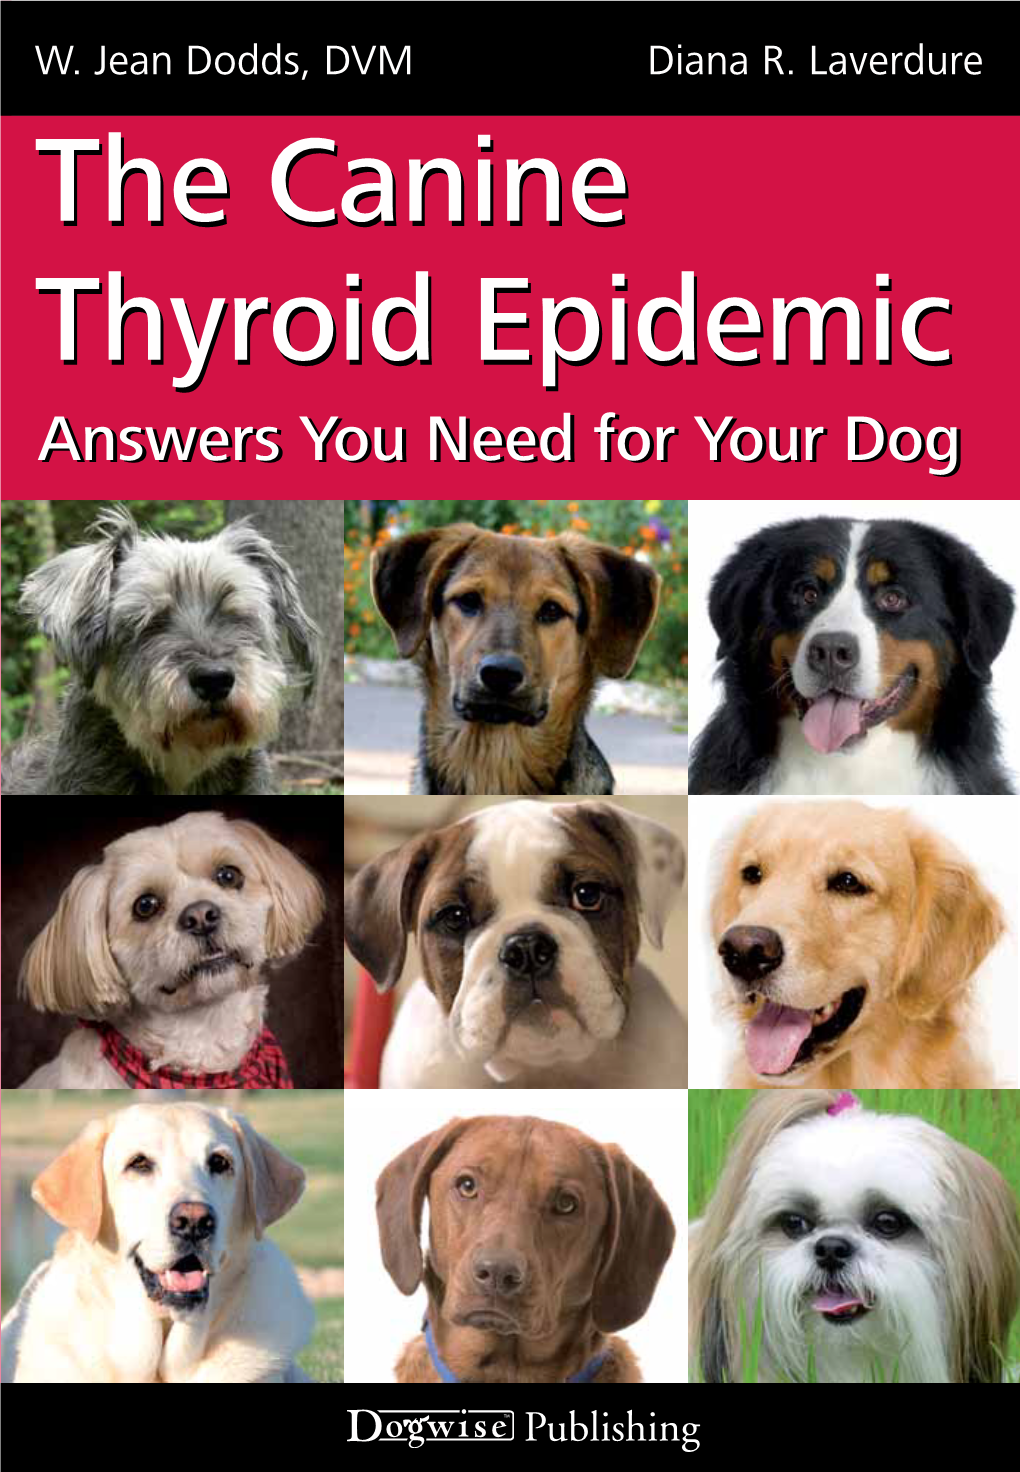 The Canine Thyroid Epidemic: Answers You Need for Your